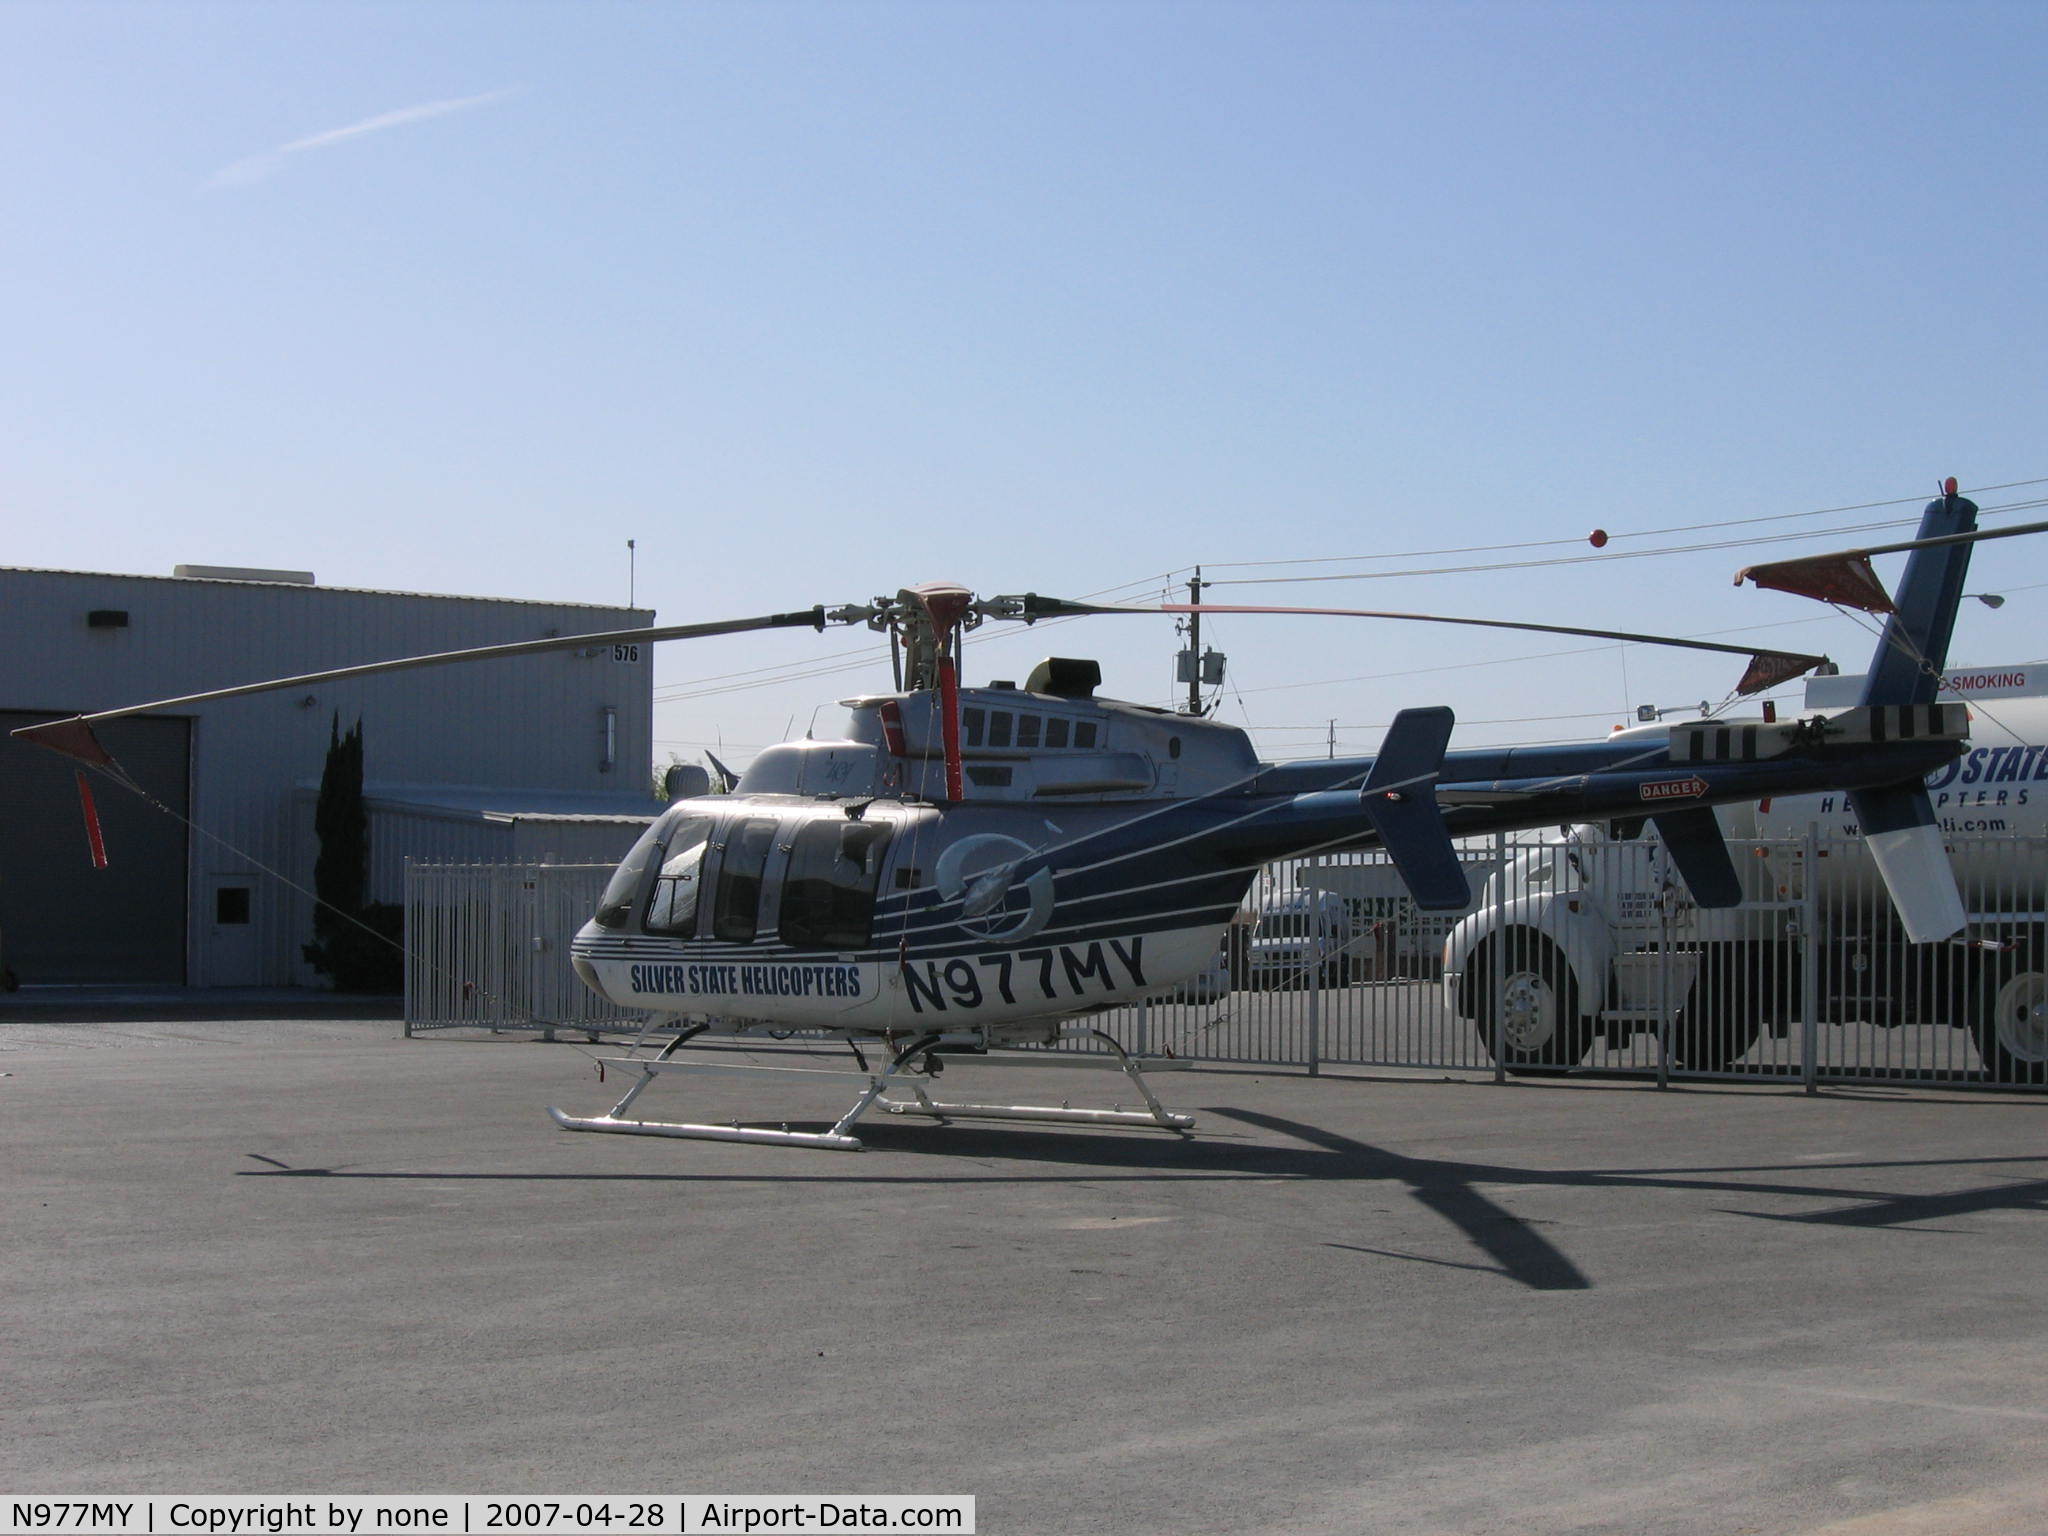 N977MY, 1999 Bell 407 C/N 53373, Bell 407 at Silver State Helicopters Headquarters.